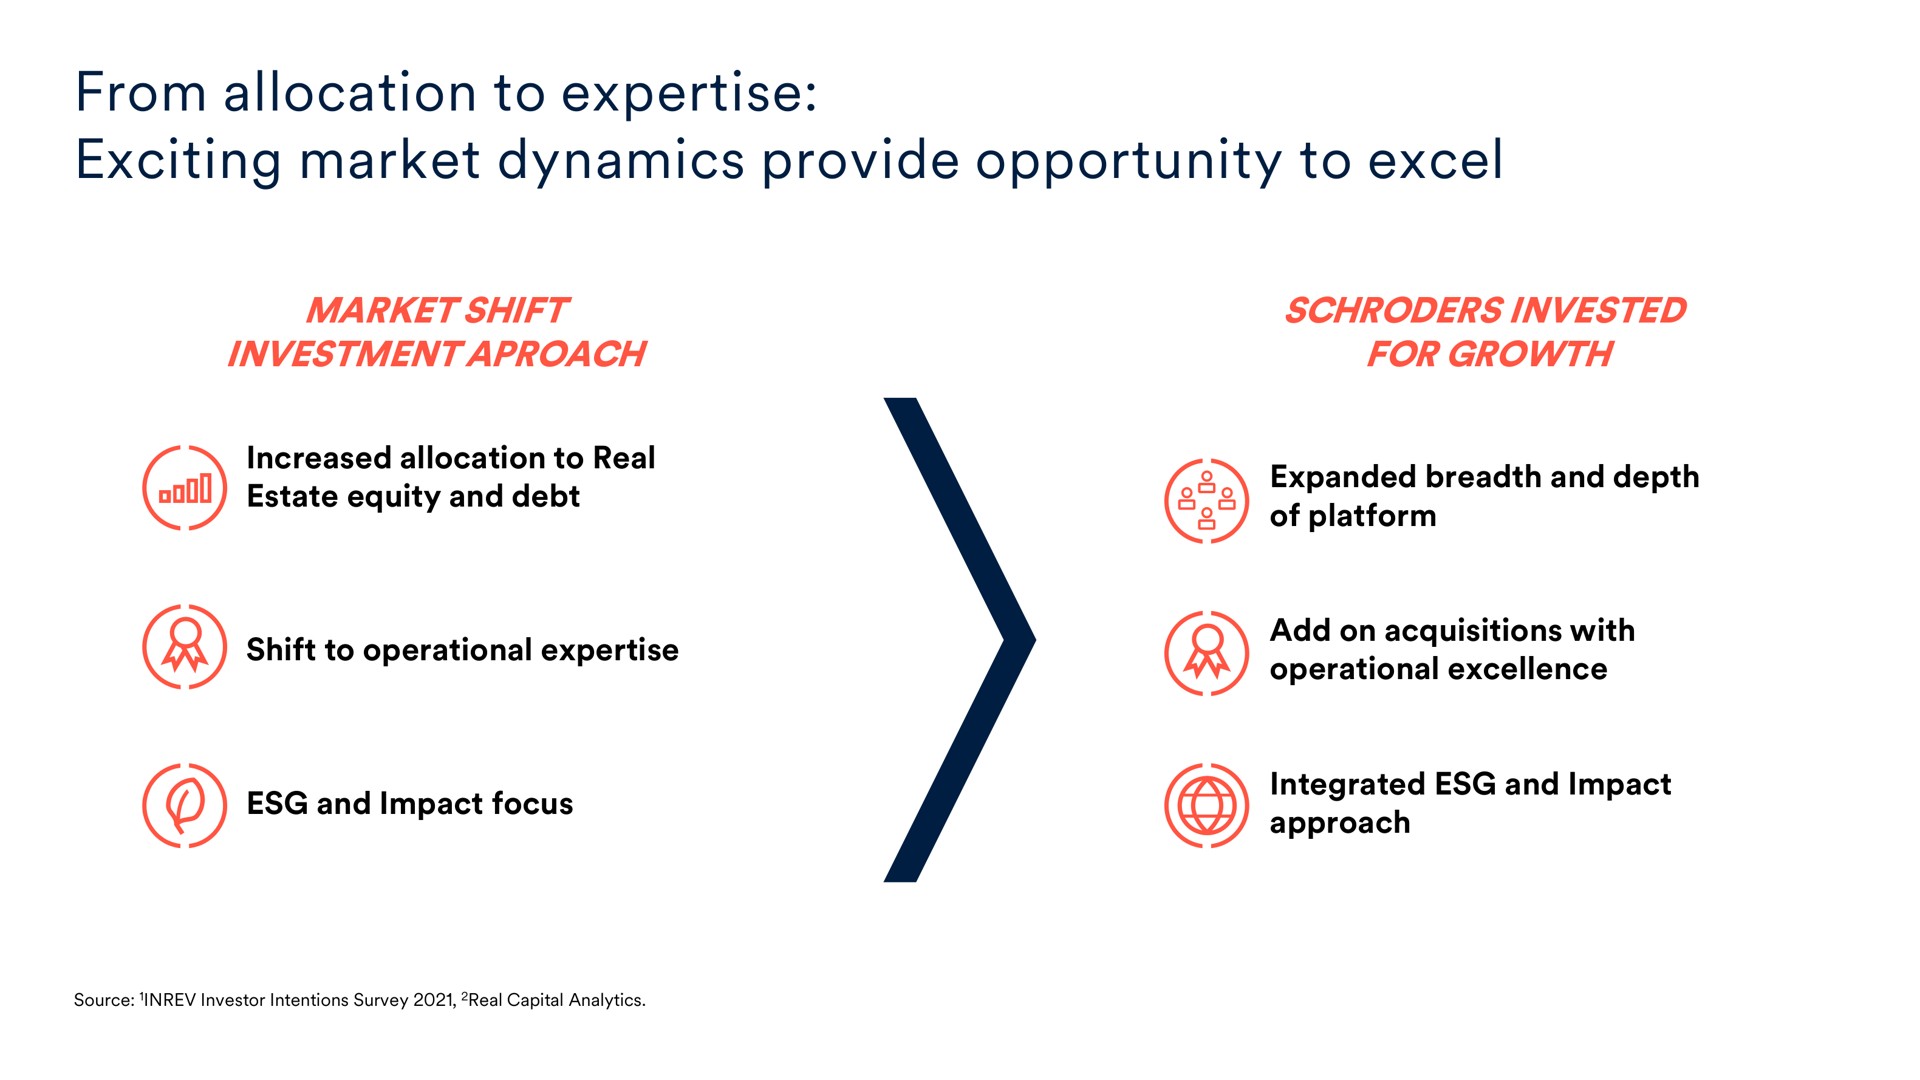 from allocation to exciting market dynamics provide opportunity to excel | Schroders